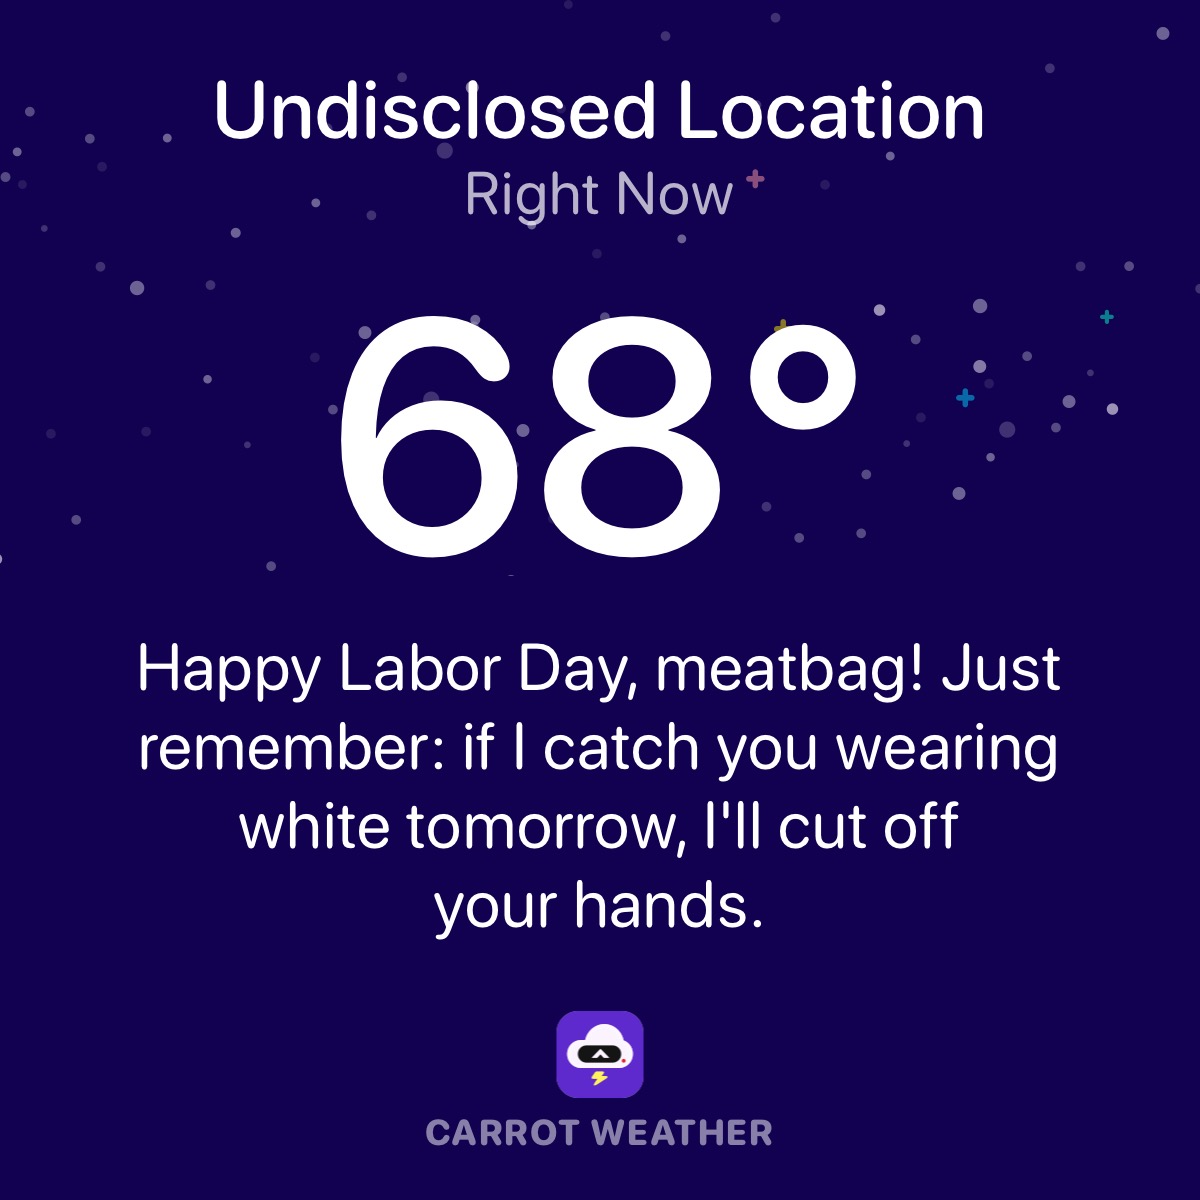 Carrot Weather: "Happy Labor Day, meatbag! Just remember: if I catch you wearing white tomorrow, I'll cut off your hands."